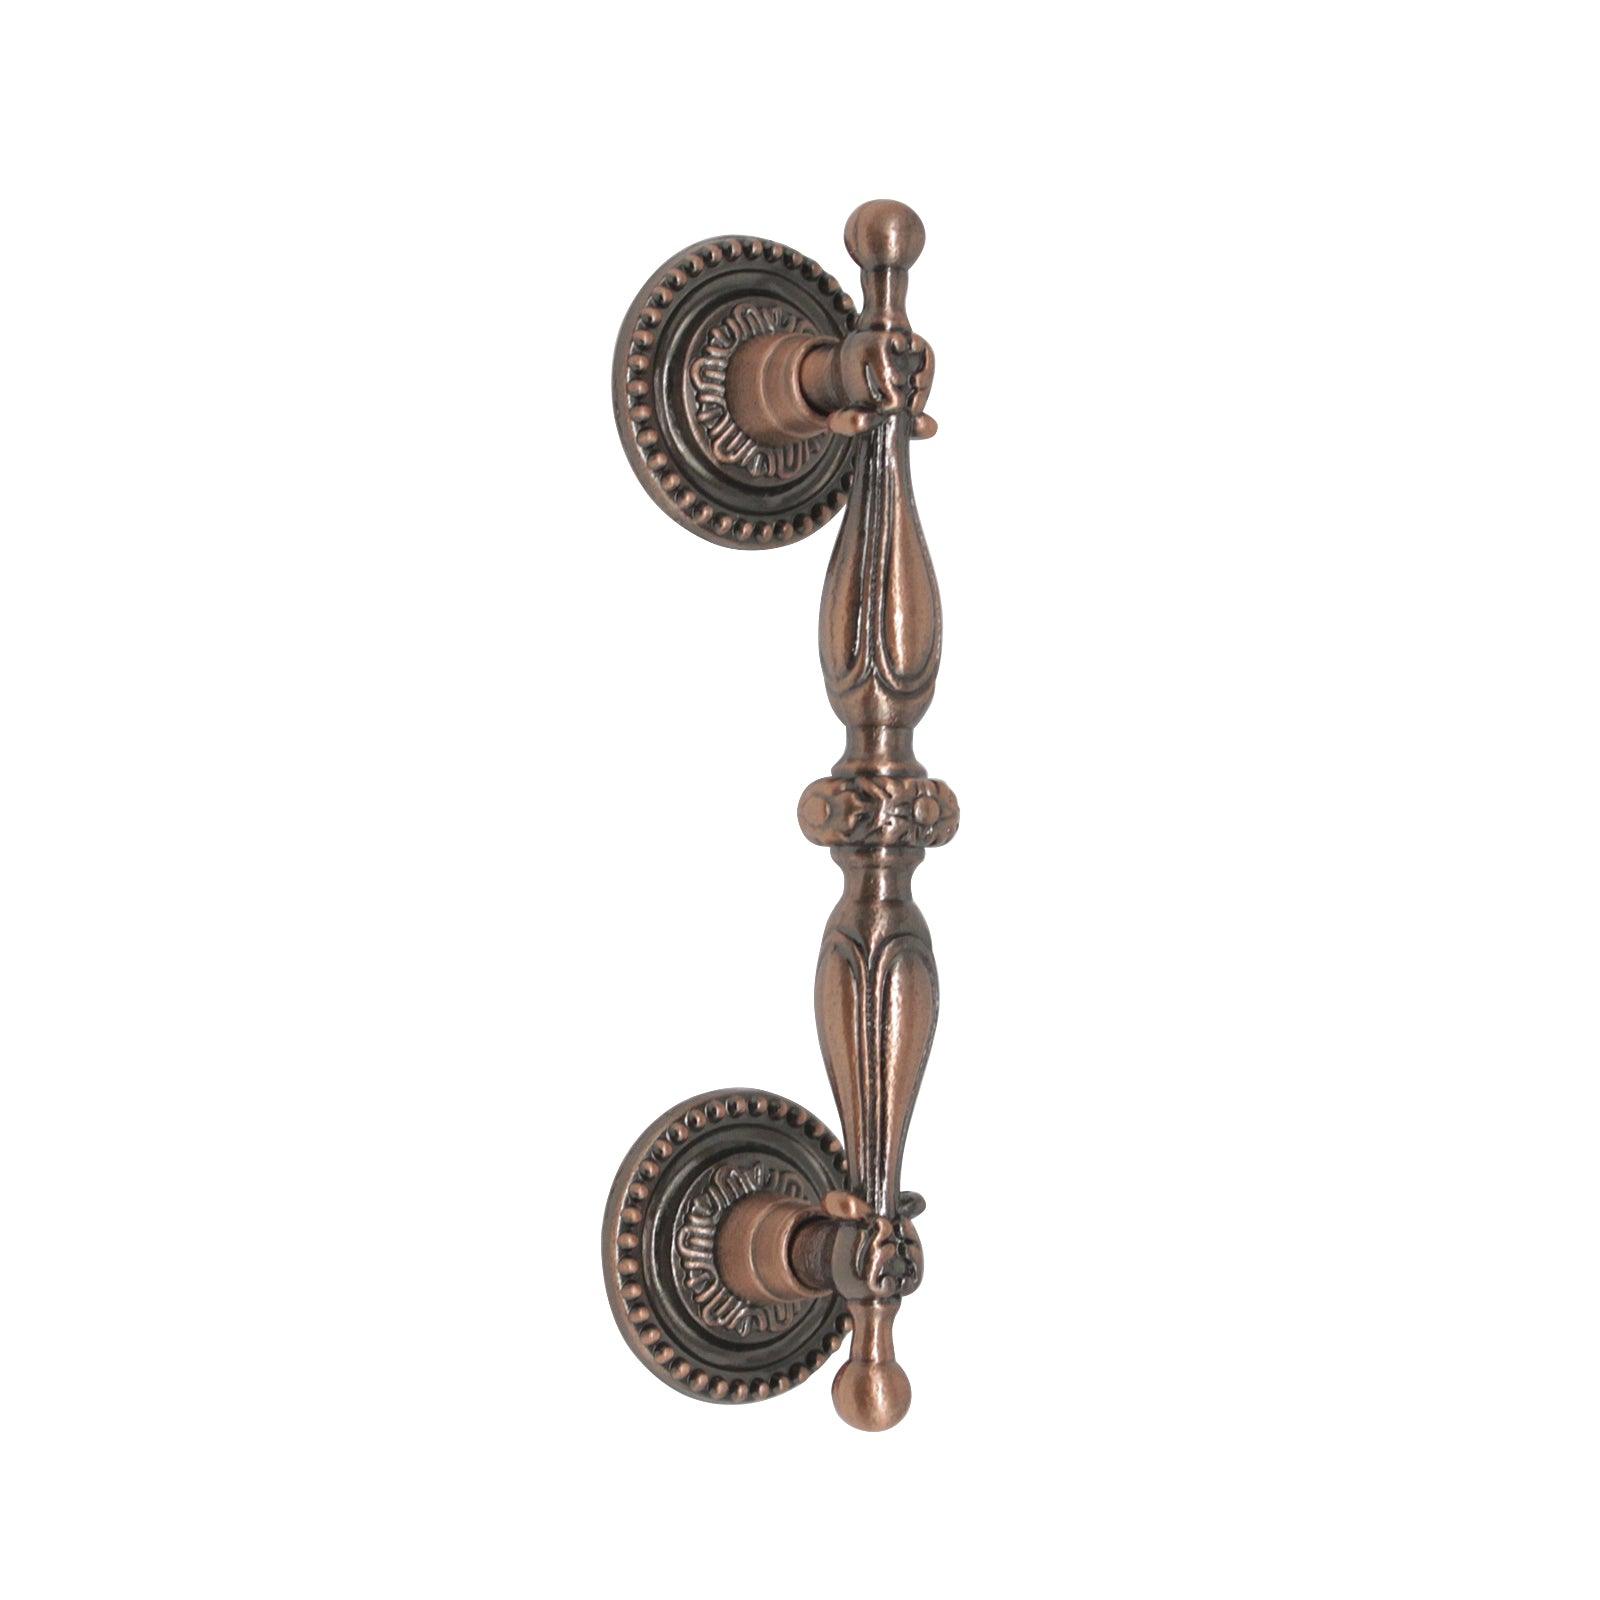 Vintage Style Drawer Handles Pulls 90mm 3 1/2inch Hole Centers Antique Bronze/Copper Finish PD2227 - Probrico